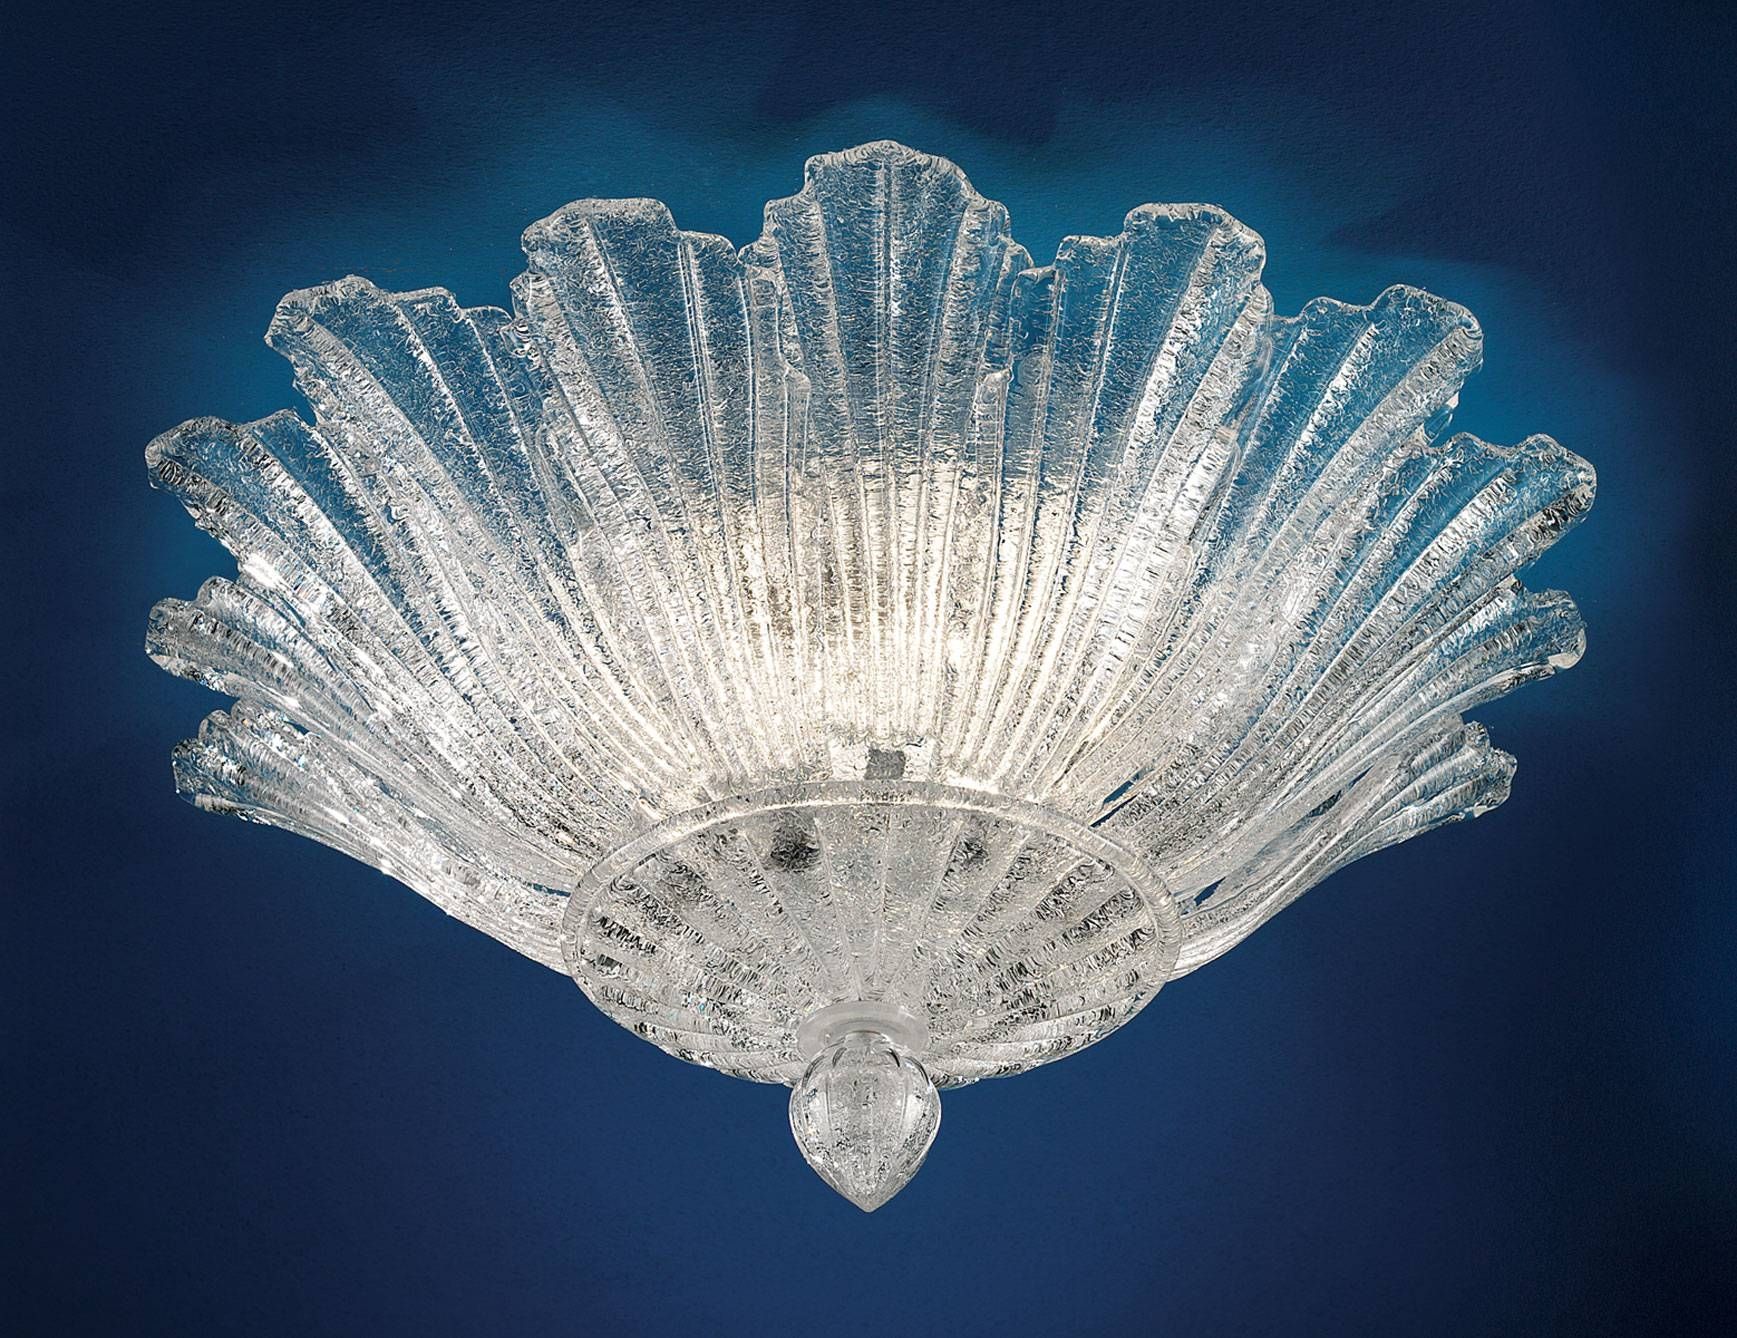 Murano Glass Ceiling Light – The World Finest Glass Ceiling With Regard To Murano Lights Fixtures (View 5 of 15)